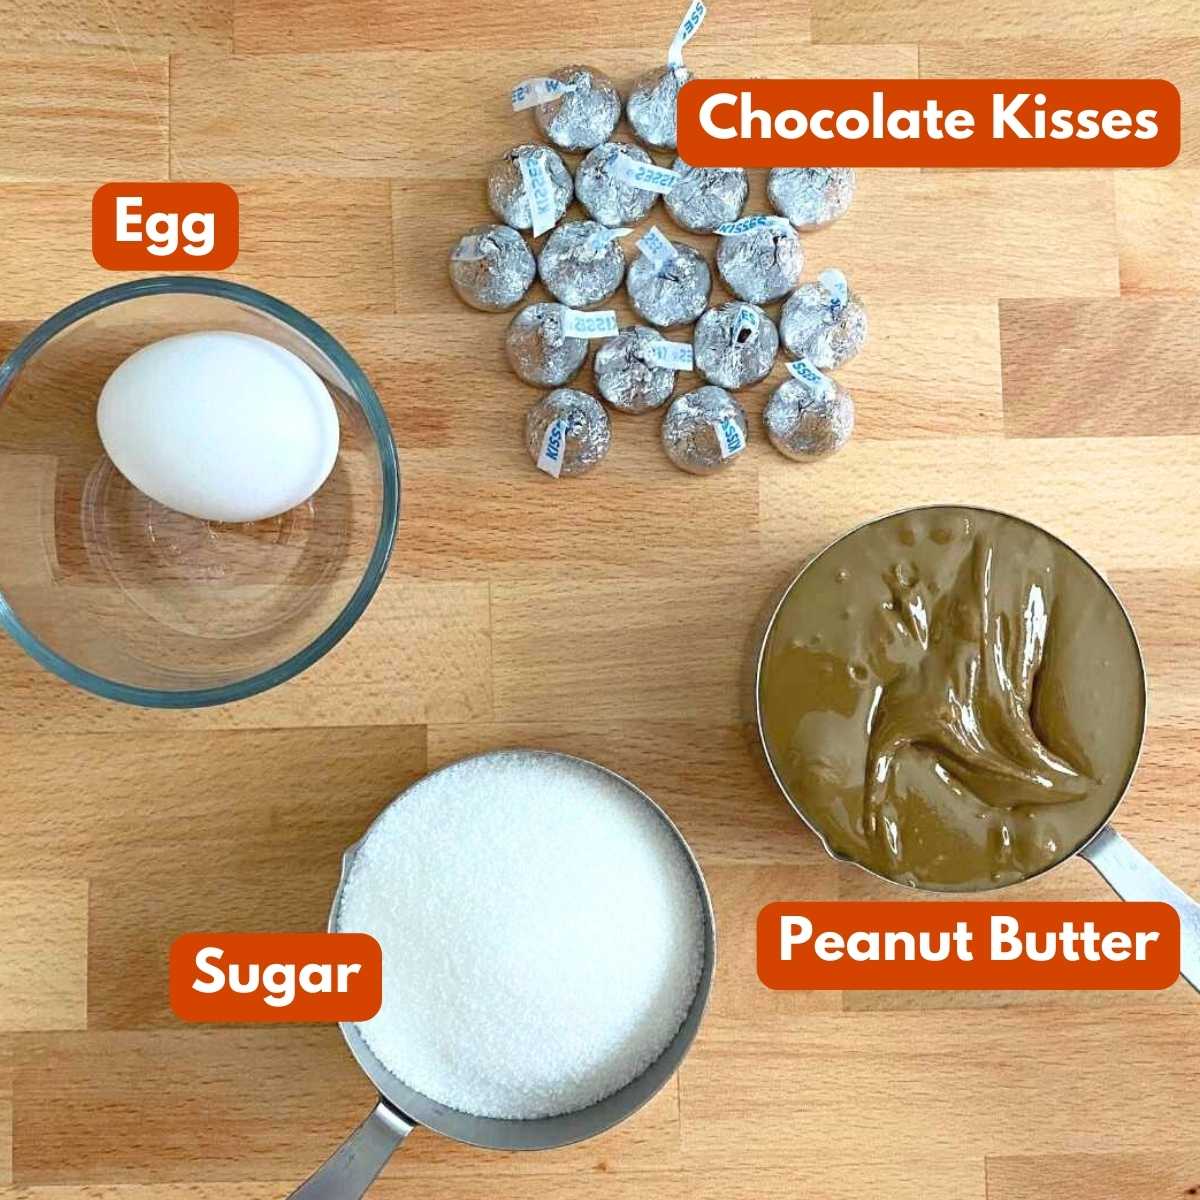 Ingredient to make easy peanut butter blossom cookies: Peanut butter, sugar, egg, and chocolate kisses.